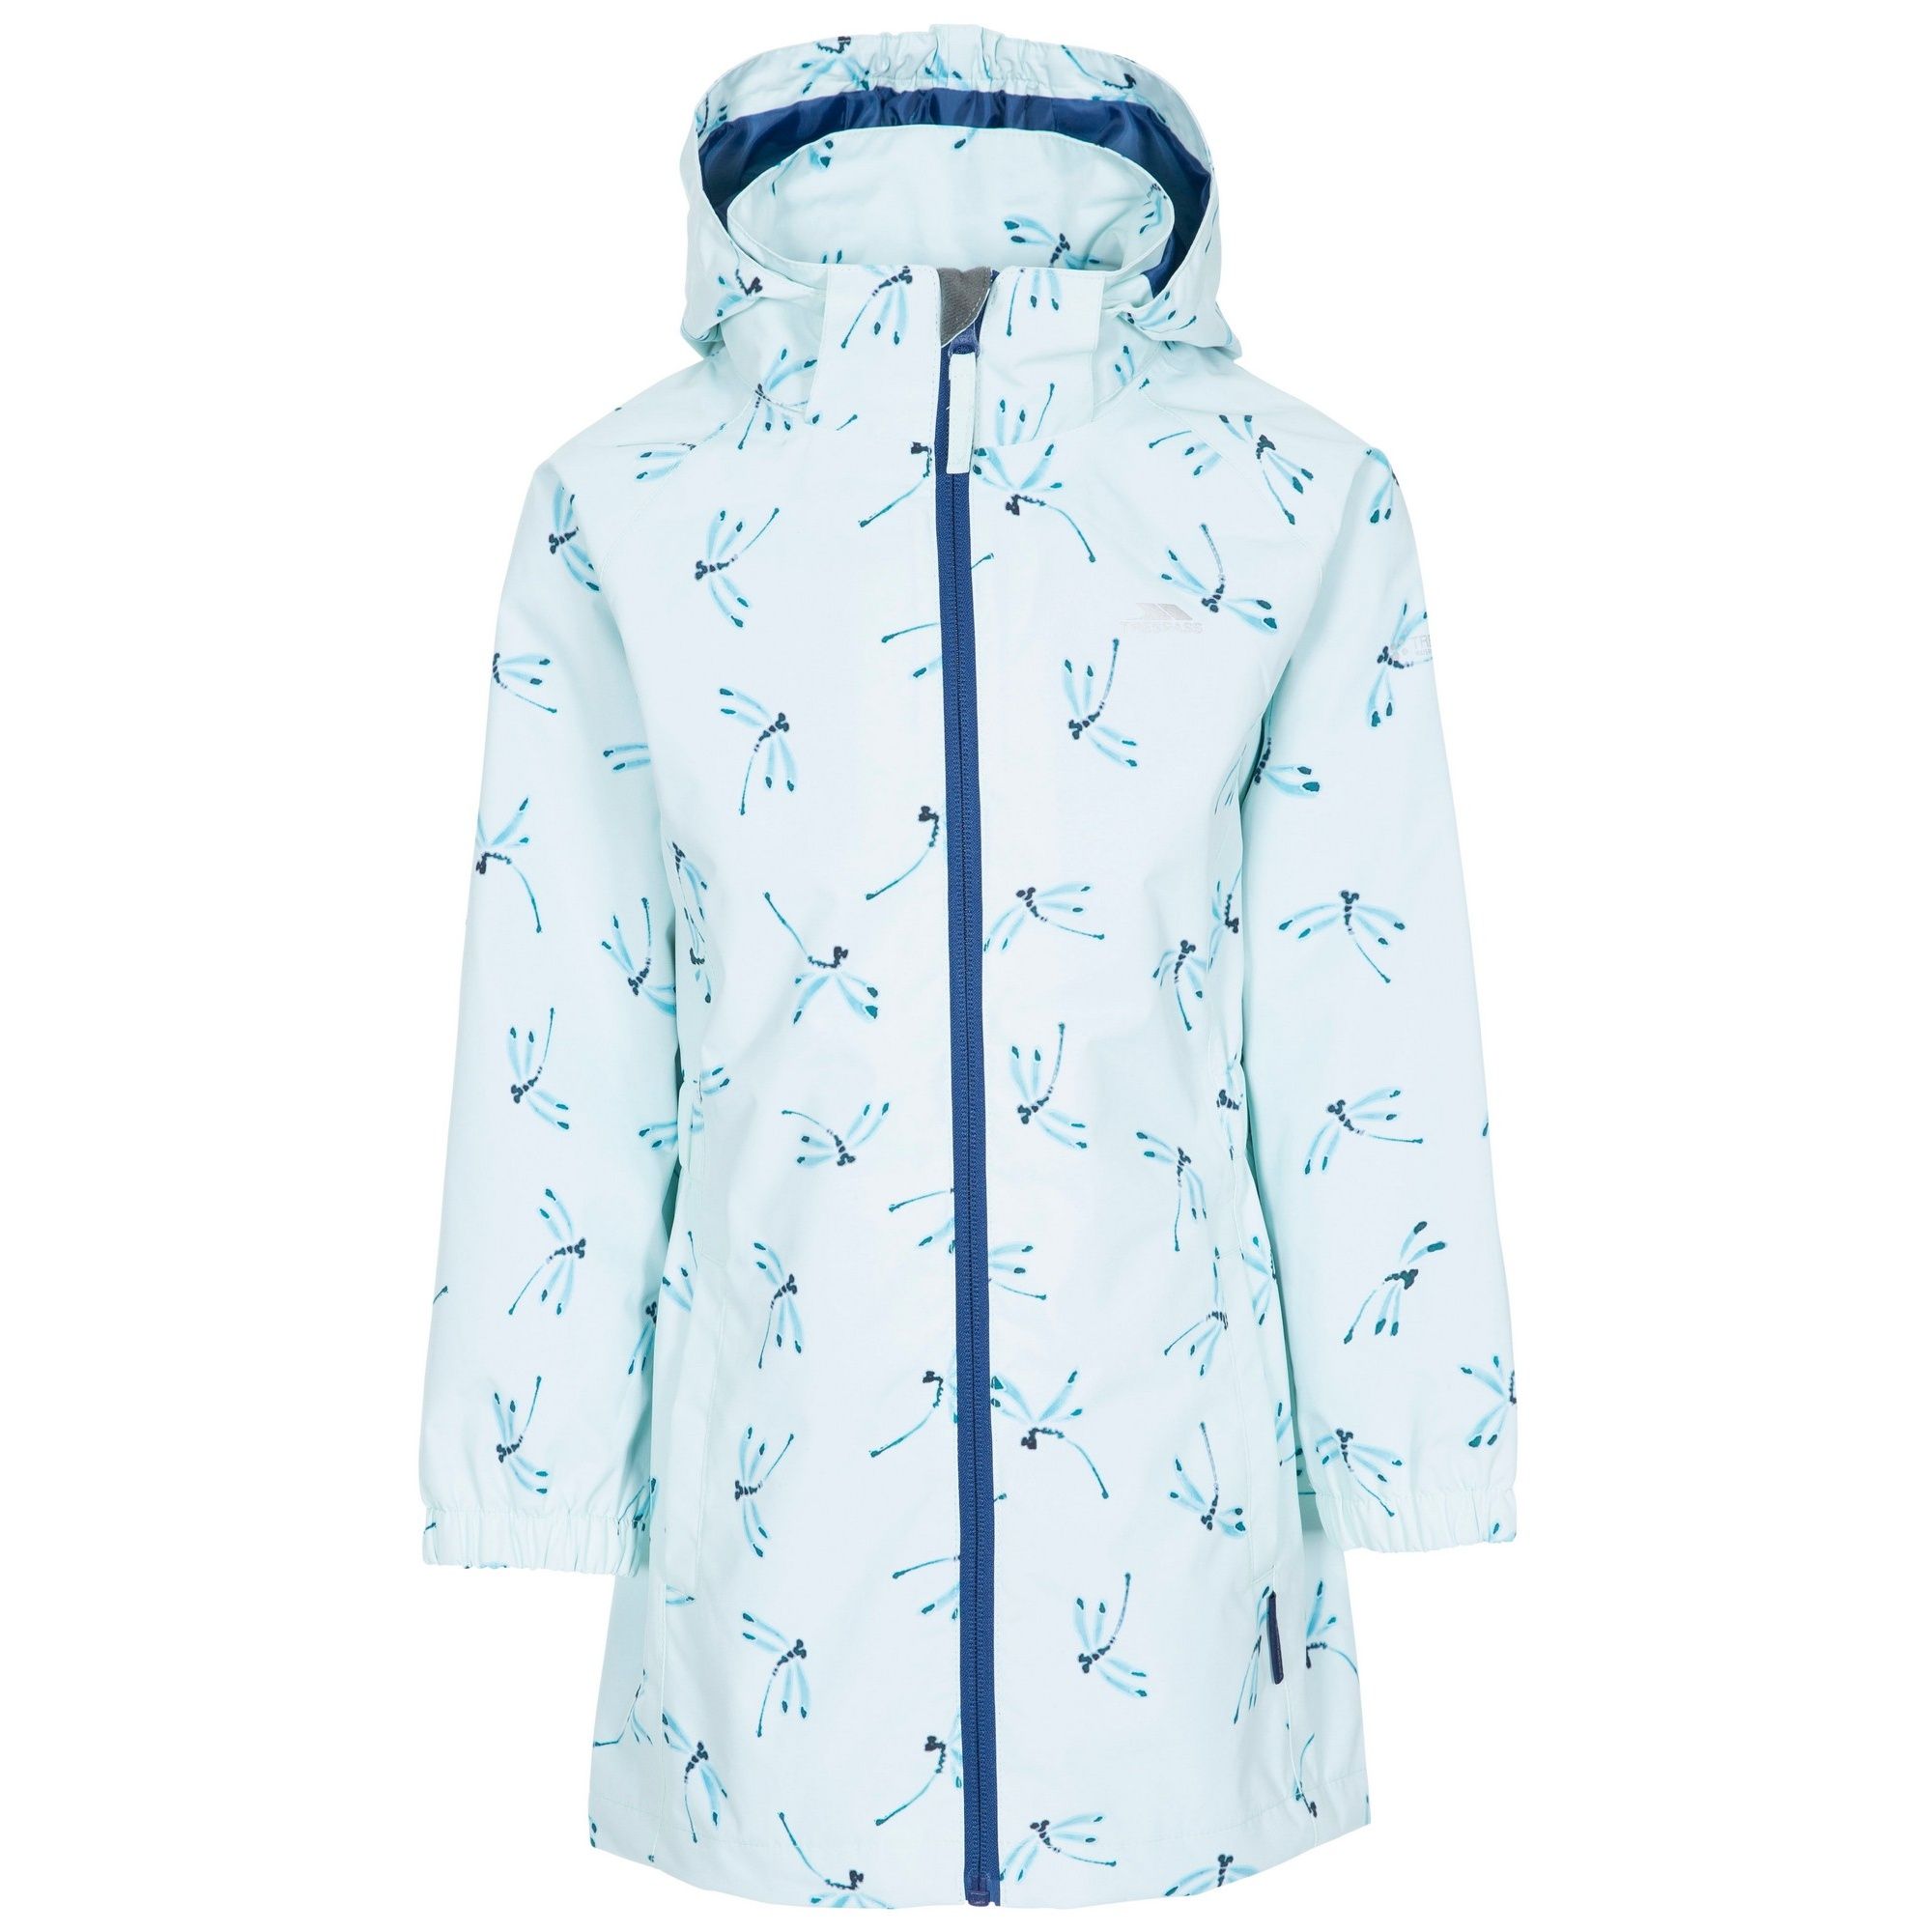 Shell: 100% Polyester PVC, Lining: 100% Polyester. All over printed jacket. 2 welt pockets. Partial waist elastication. Deeper hem at the back. Hood is detachable with studs. Contrast centre front zip. Waterproof 2000mm, windproof, taped seams. Trespass Childrens Chest Sizing (approx): 2-3 Years - 21in/53cm, 3-4 Years - 22in/56cm, 5-6 Years - 24in/61cm, 7-8 Years - 26in/66cm, 9-10 Years - 28in/71cm, 11-12 Years - 31in/79cm.